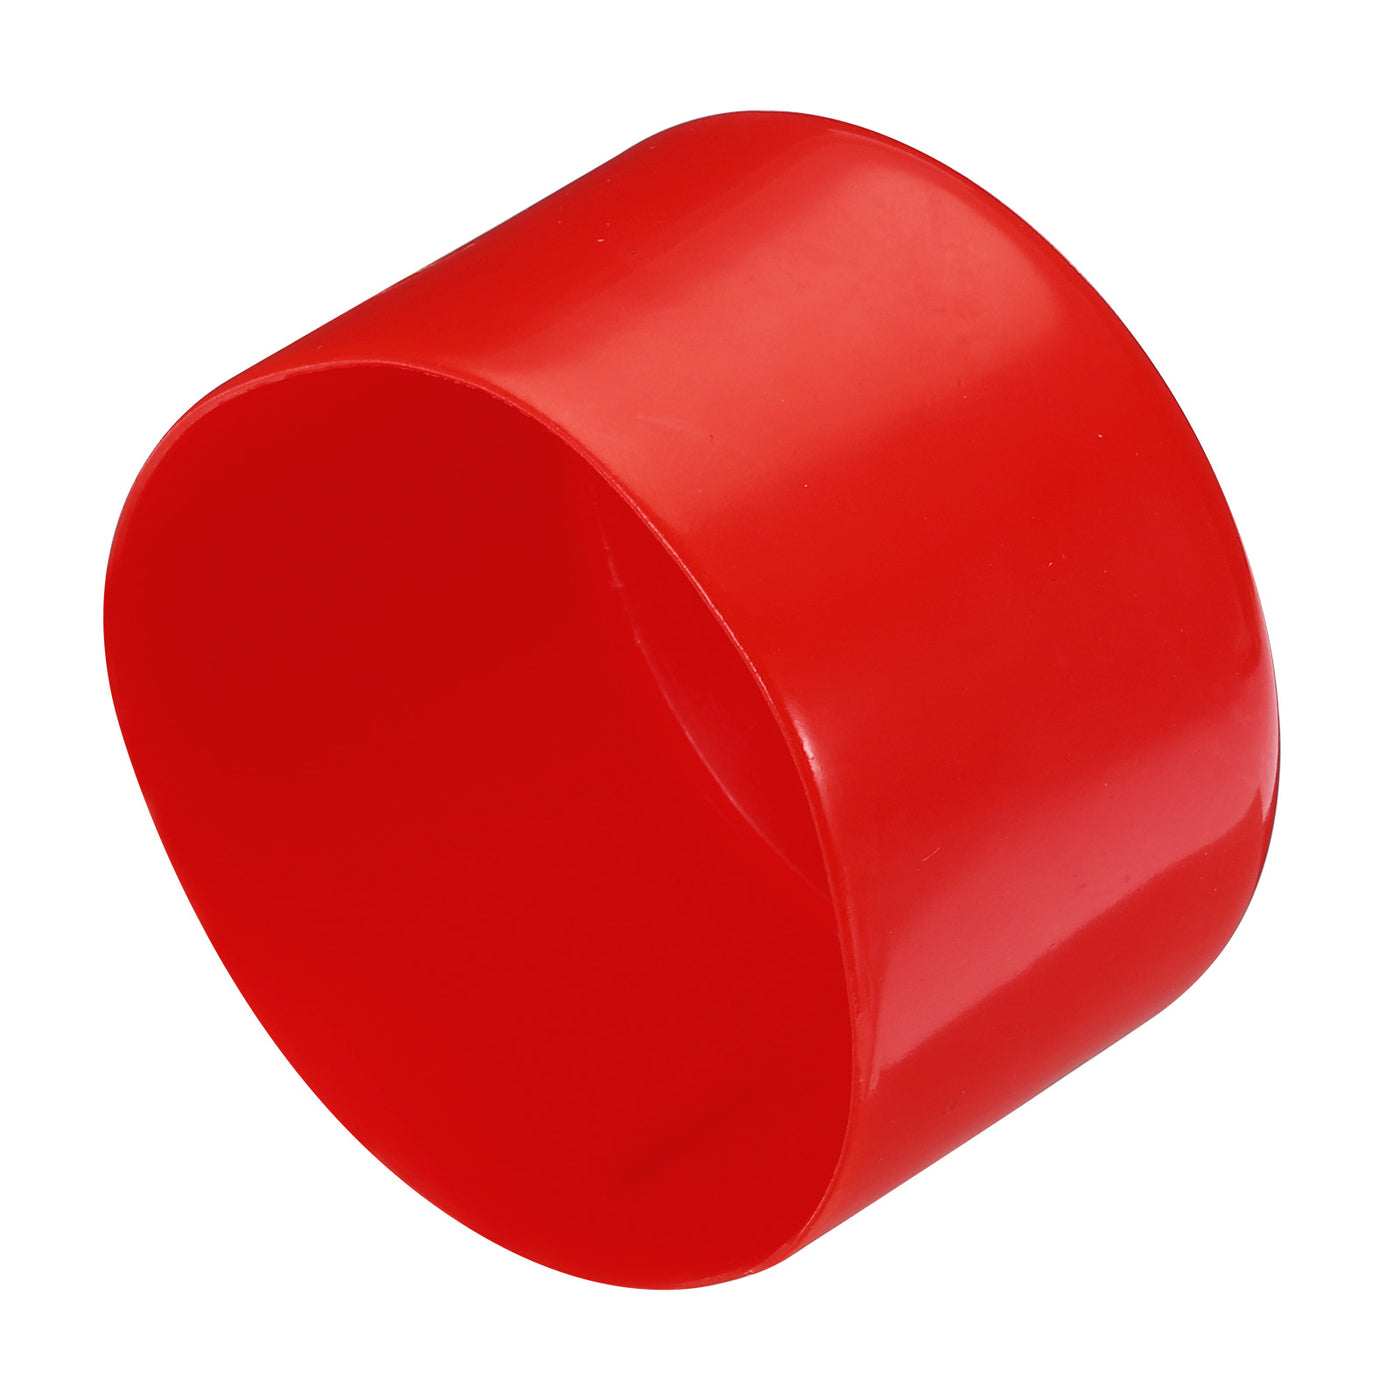 uxcell Uxcell 4pcs Rubber End Caps 75mm ID Vinyl Round Tube Bolt Cap Cover Screw Thread Protectors Red